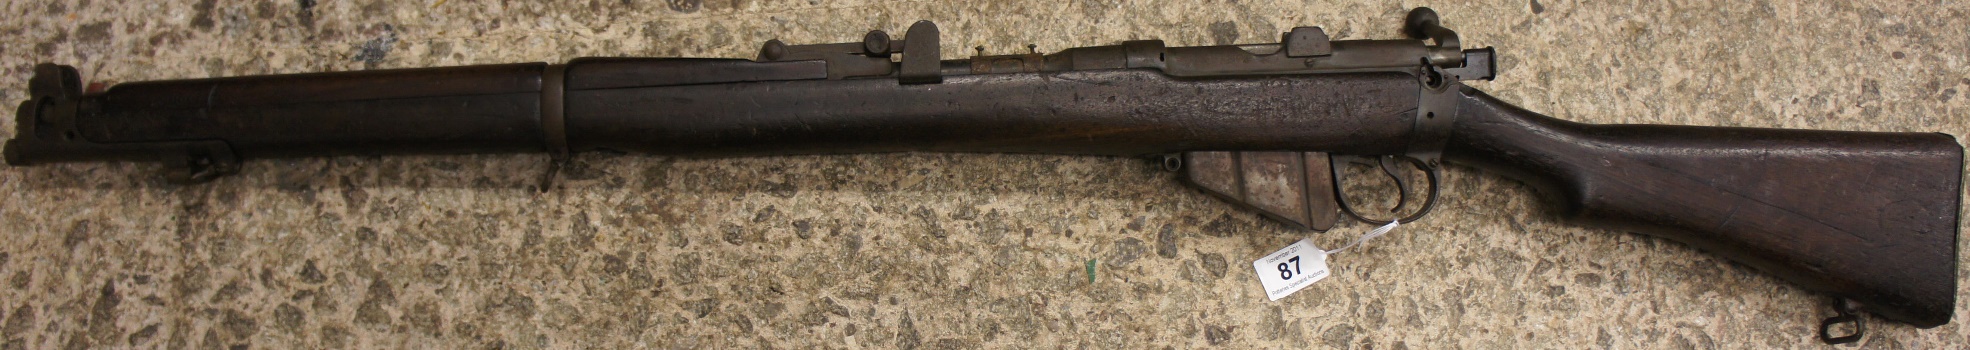 Lee Enfield SMLE Bolt Action Rifle